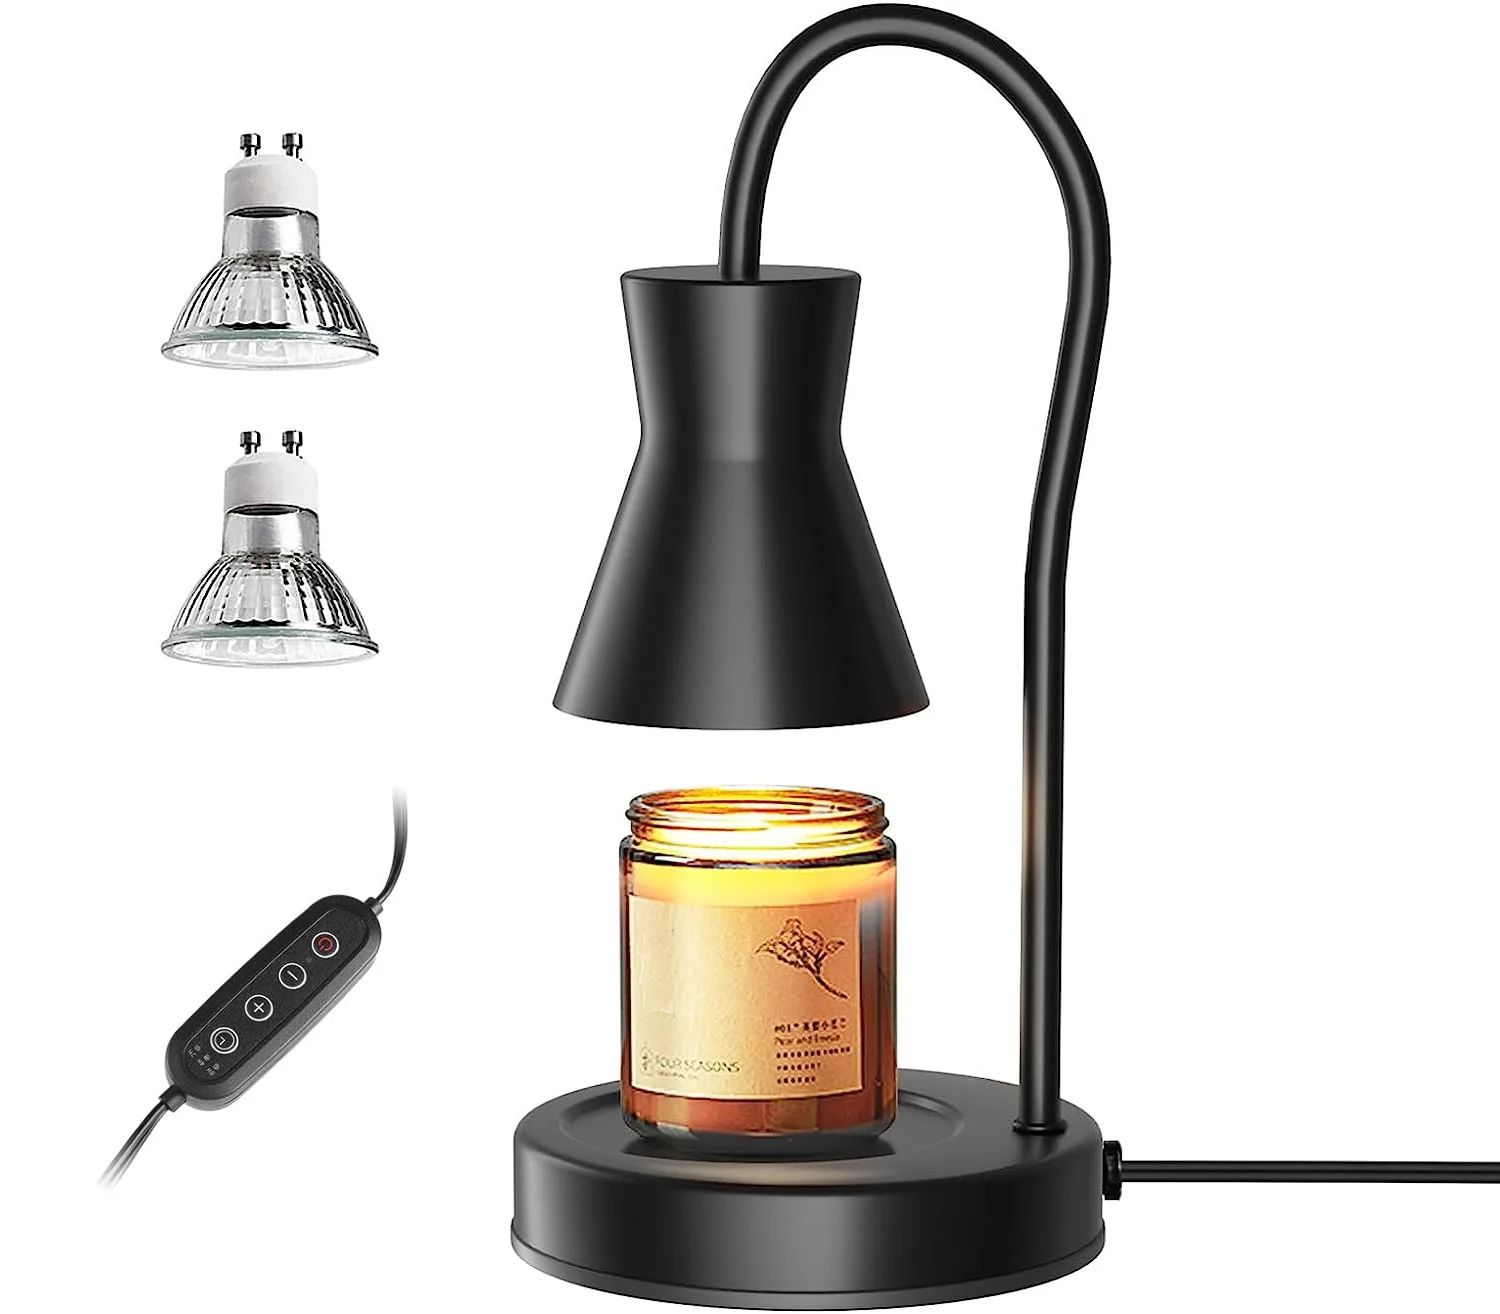 OGEDNAC Candle Warmer Lamp, Dimmable Metal Candle Lamp Warmer Height Adjustable, Compatible with ... | Walmart (US)